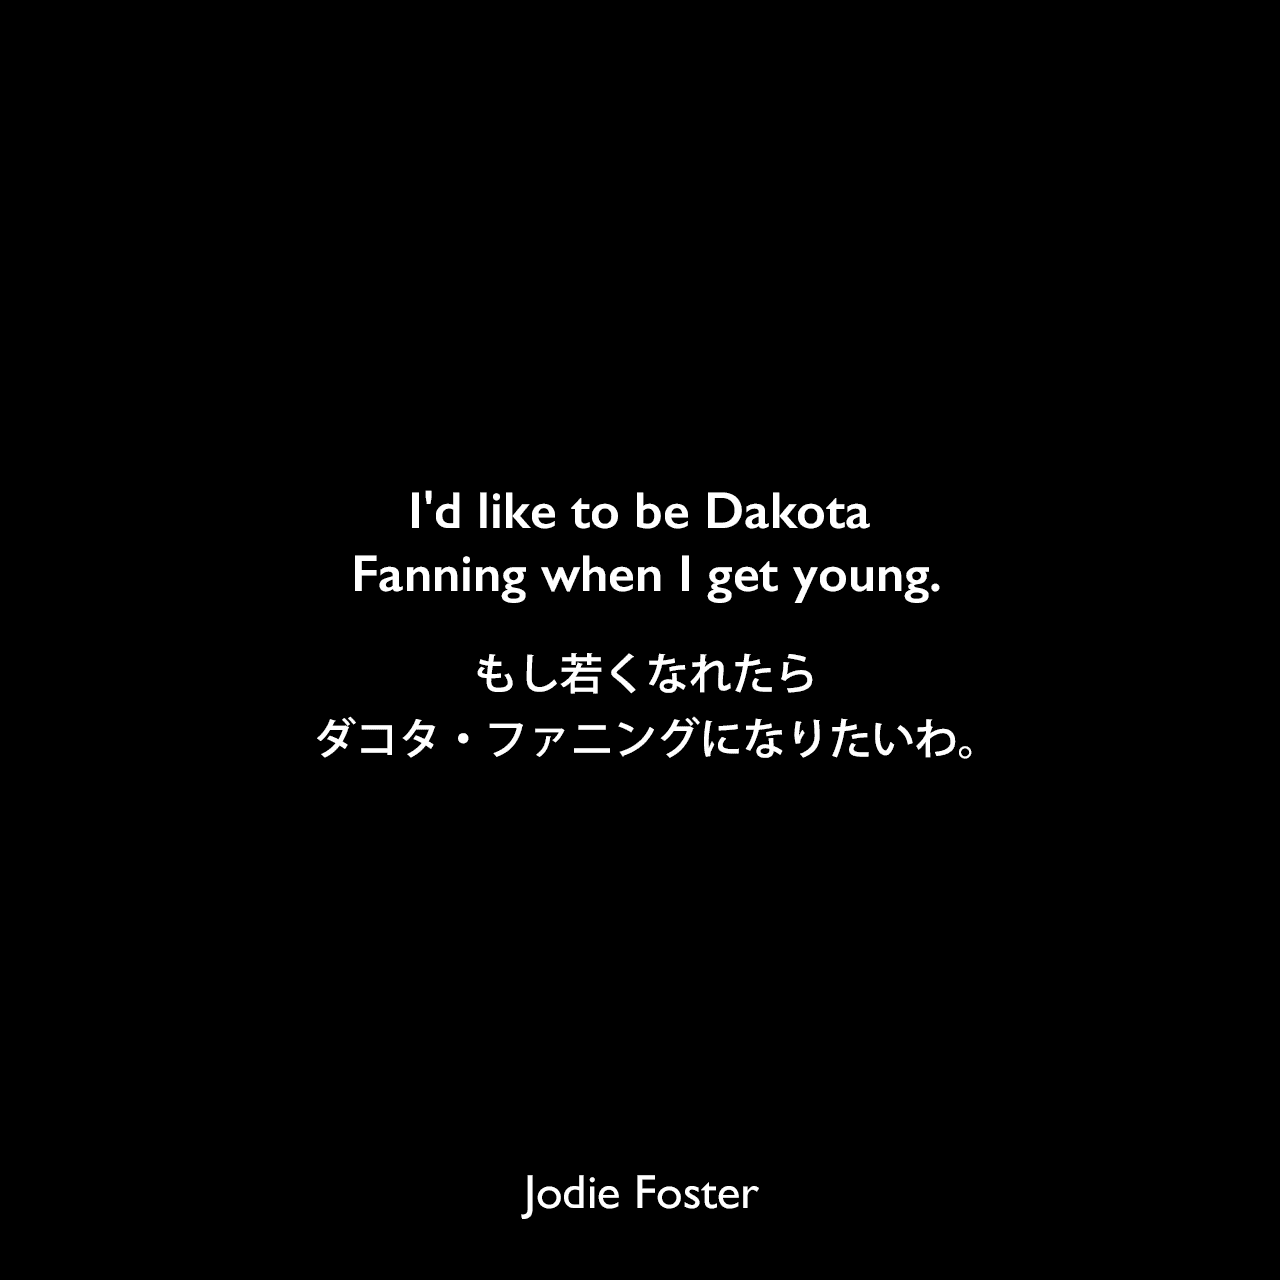 I'd like to be Dakota Fanning when I get young.もし若くなれたら、ダコタ・ファニングになりたいわ。Jodie Foster